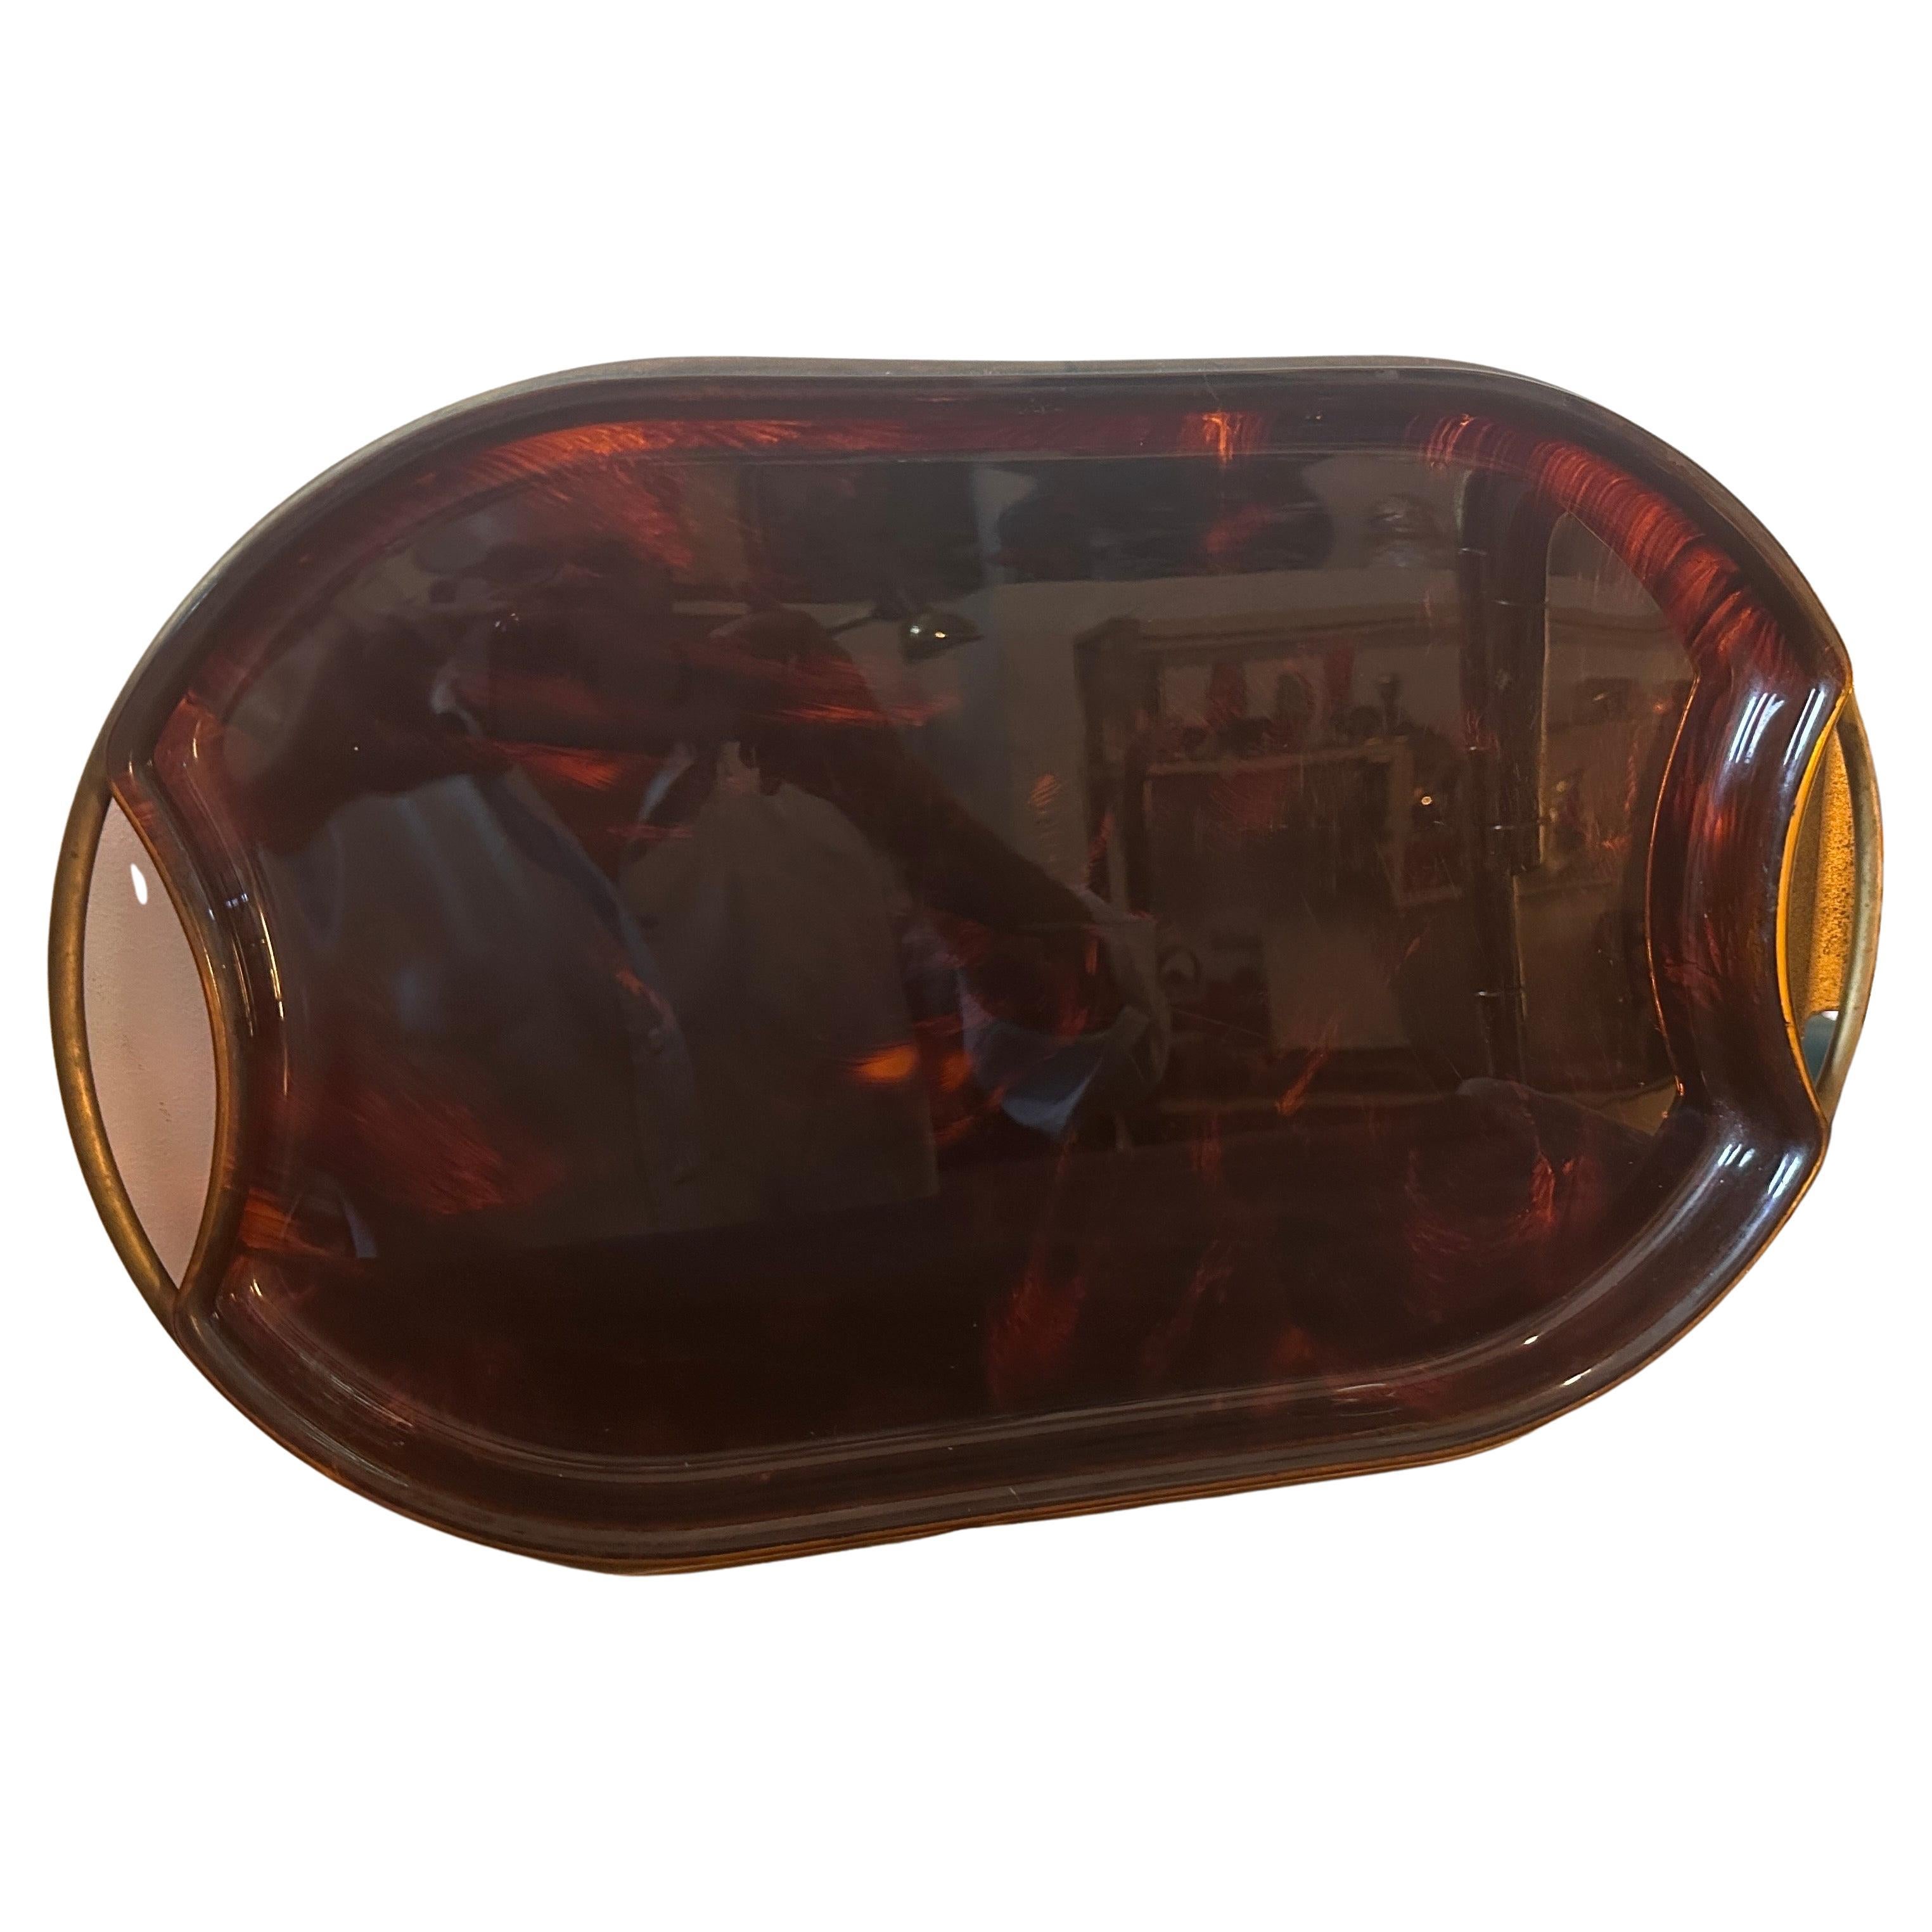 A Modernist Fake Tortoise Lucite and Brass vintage tray designed and manufactured by the Italian design company Guzzini during the 1970s in lovely conditions. The Guzzini company is a well-known Italian brand that specializes in the production of